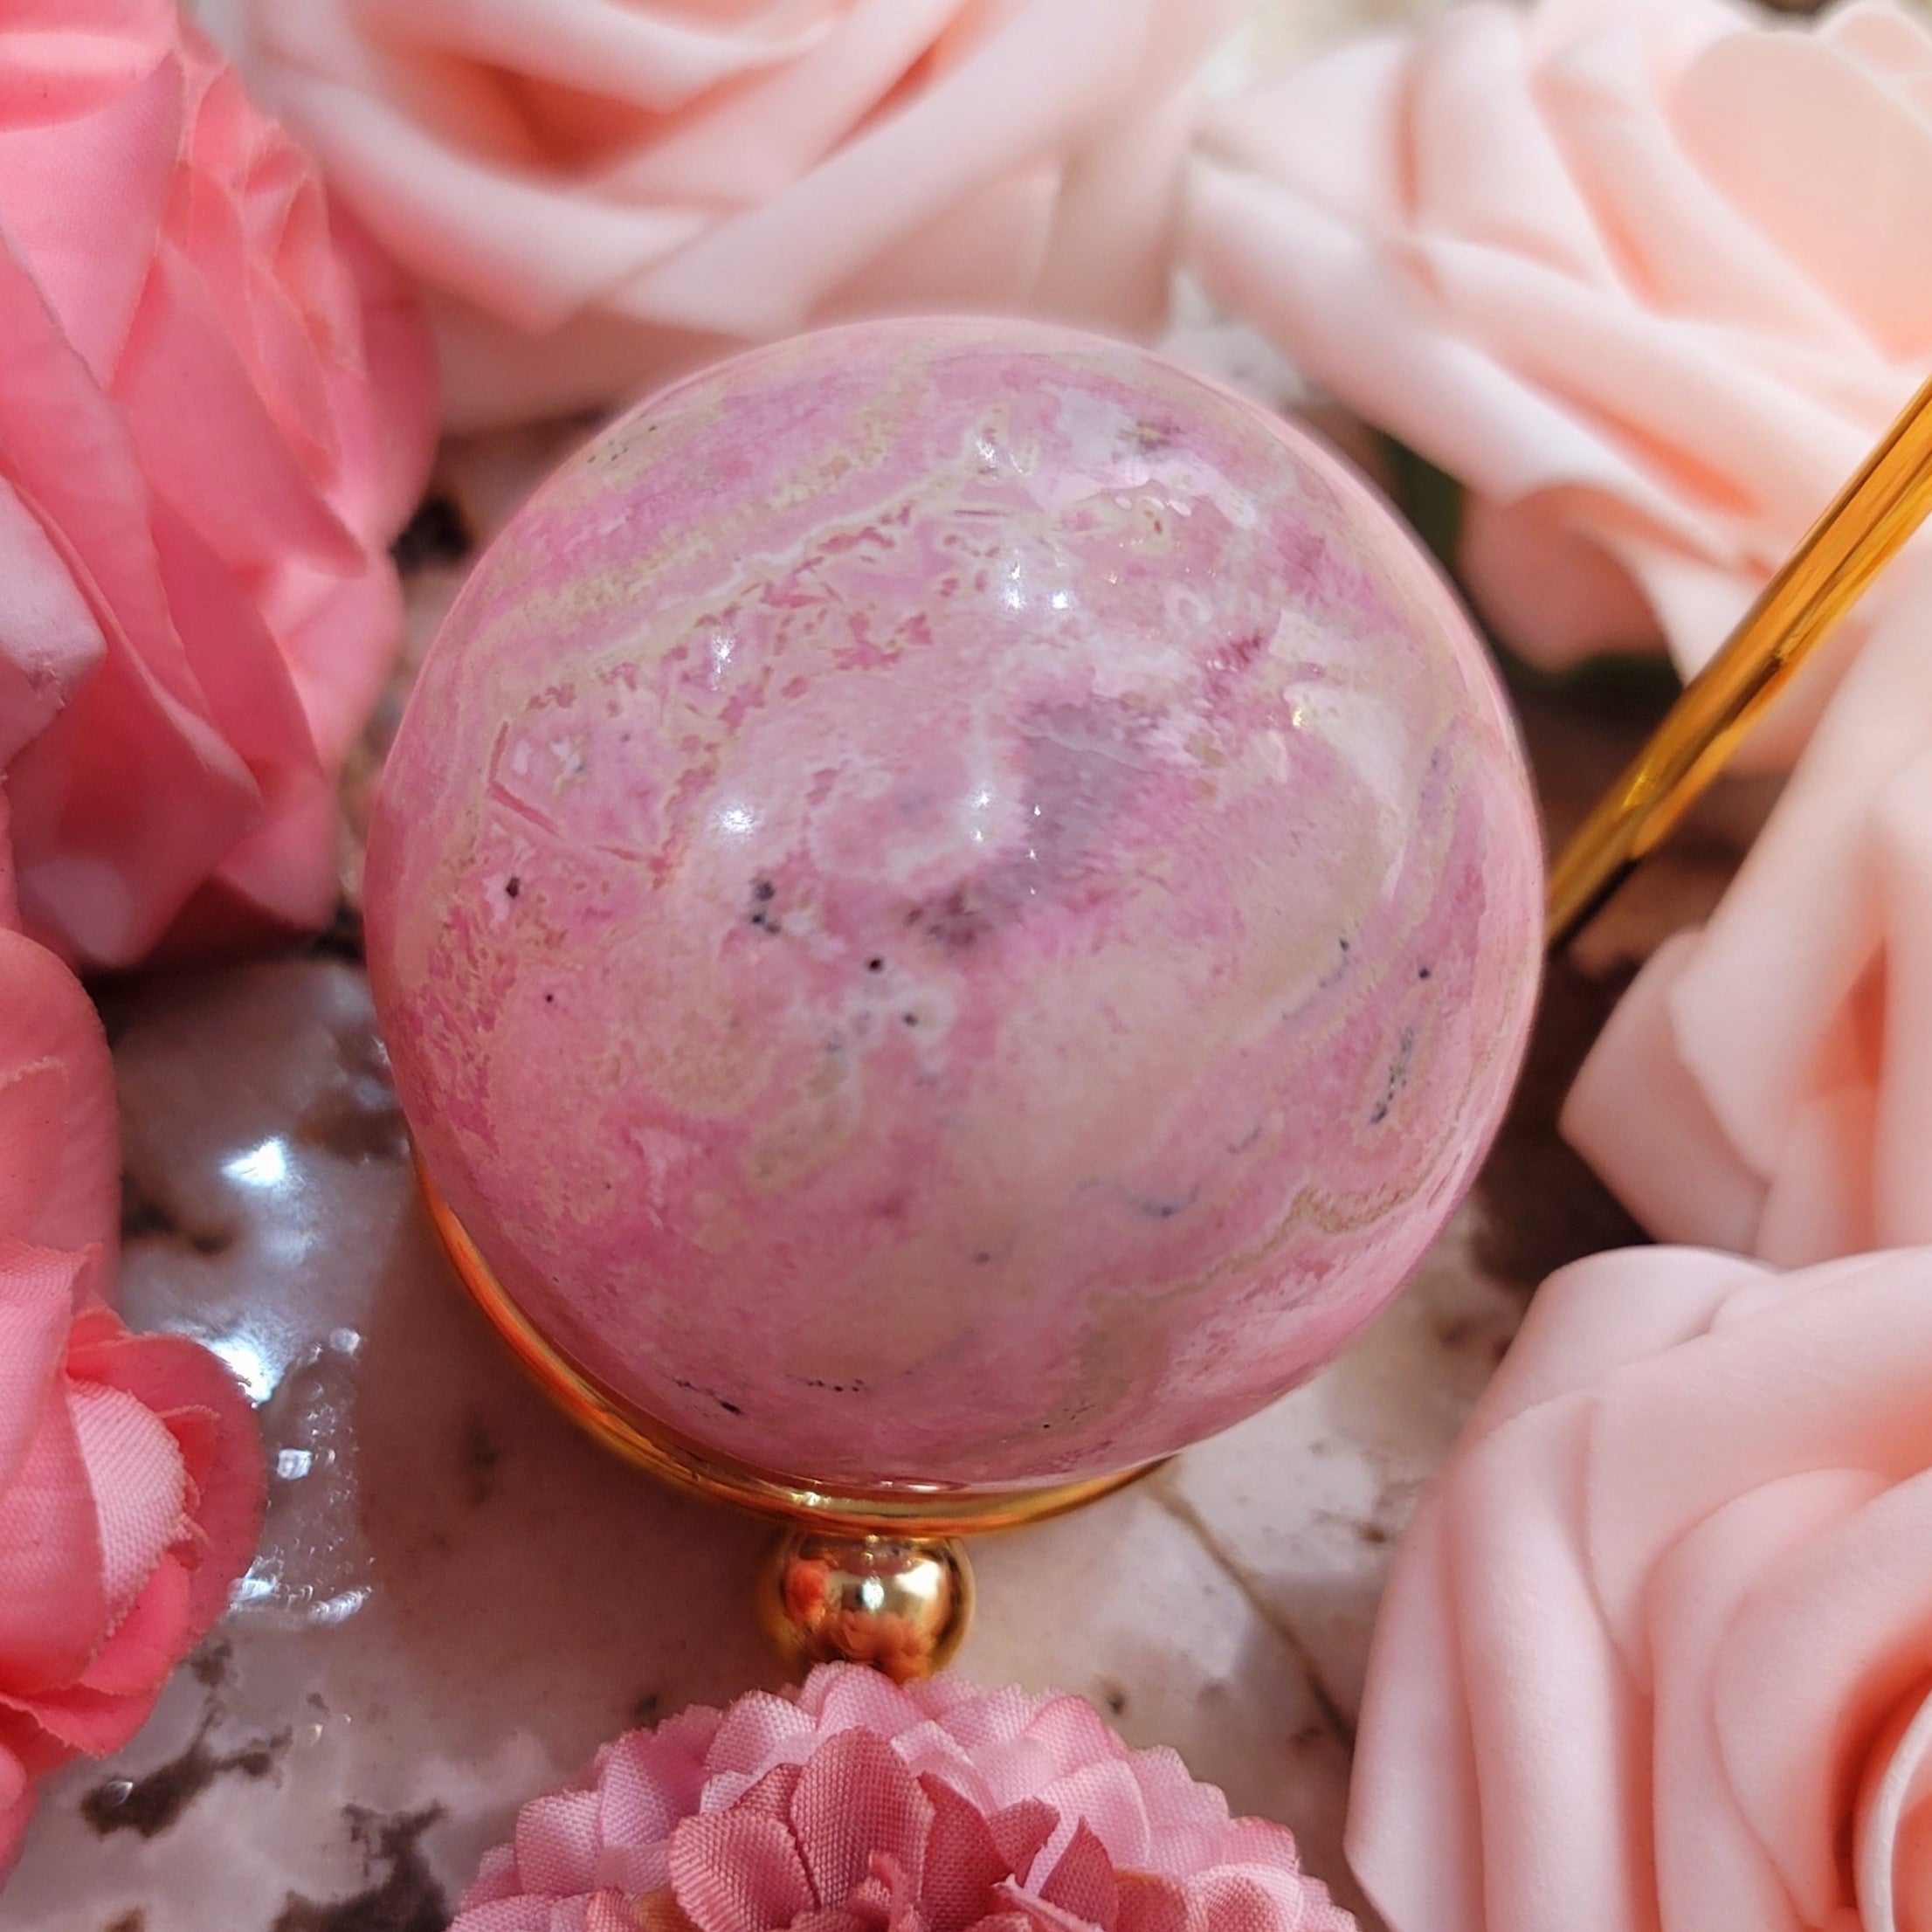 Rhodonite Sphere for Attraction, Romance and Self Worth